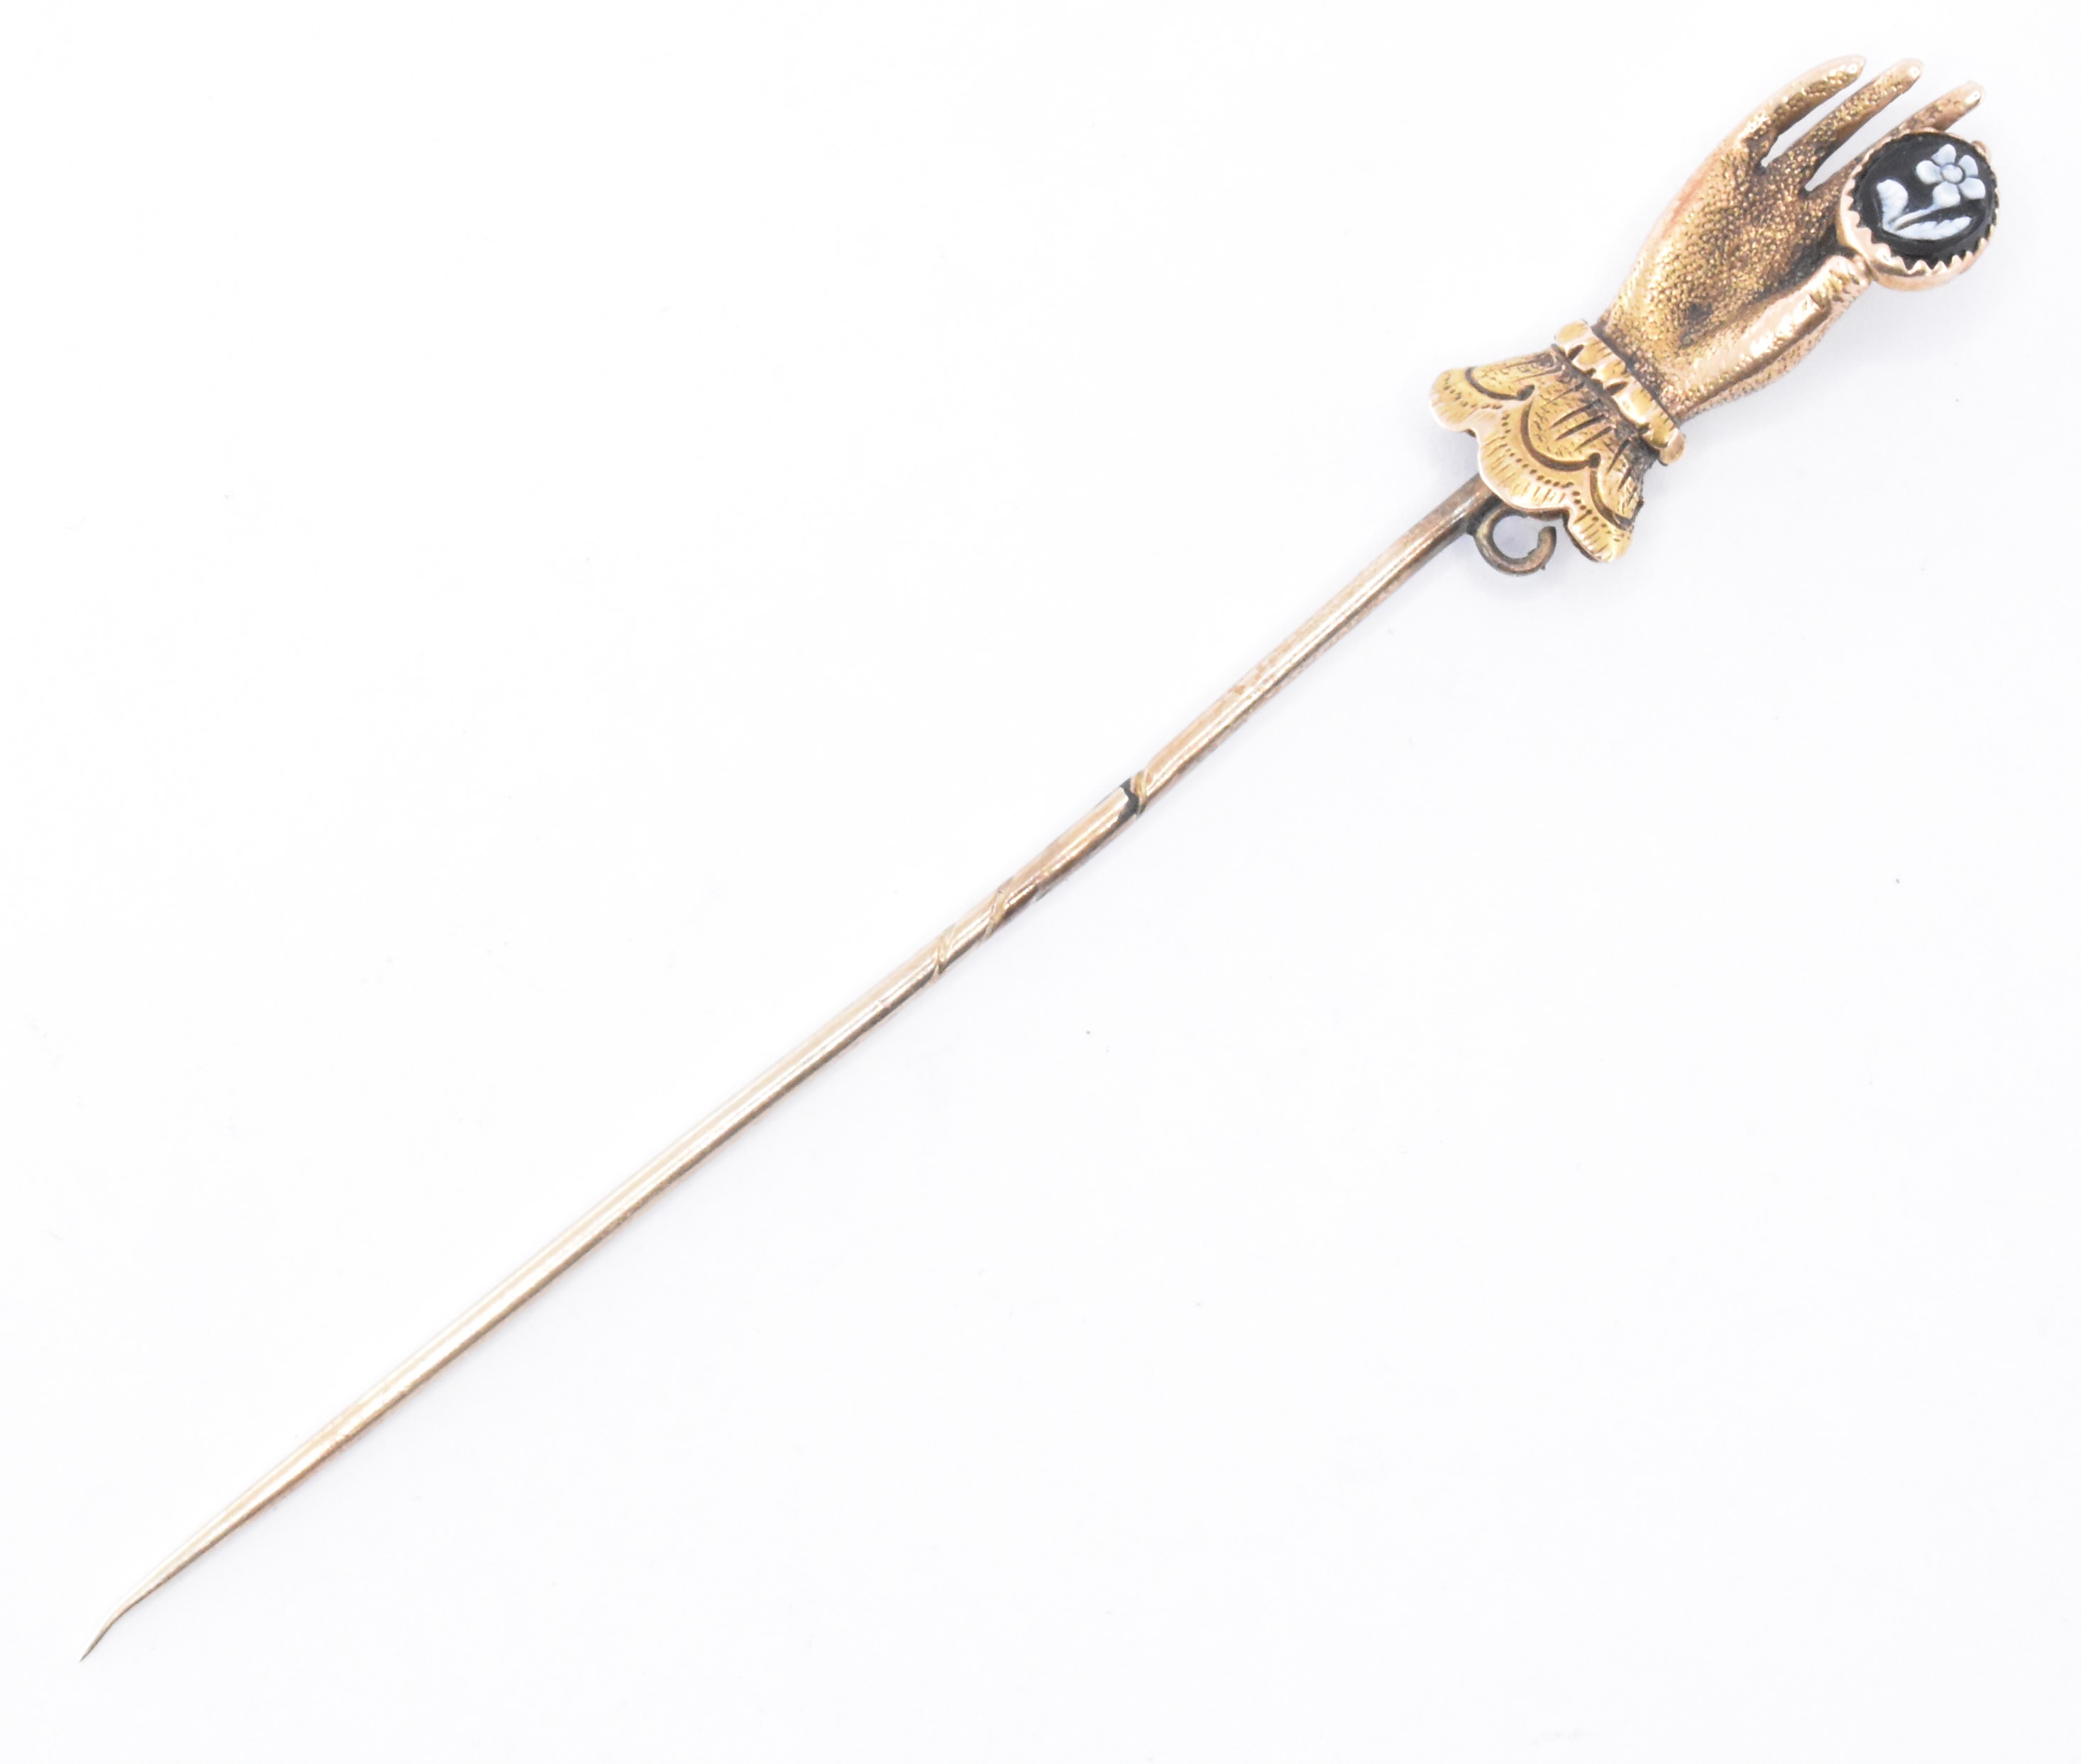 GEORGE III GOLD HAND & CAMEO STICK PIN - Image 2 of 3